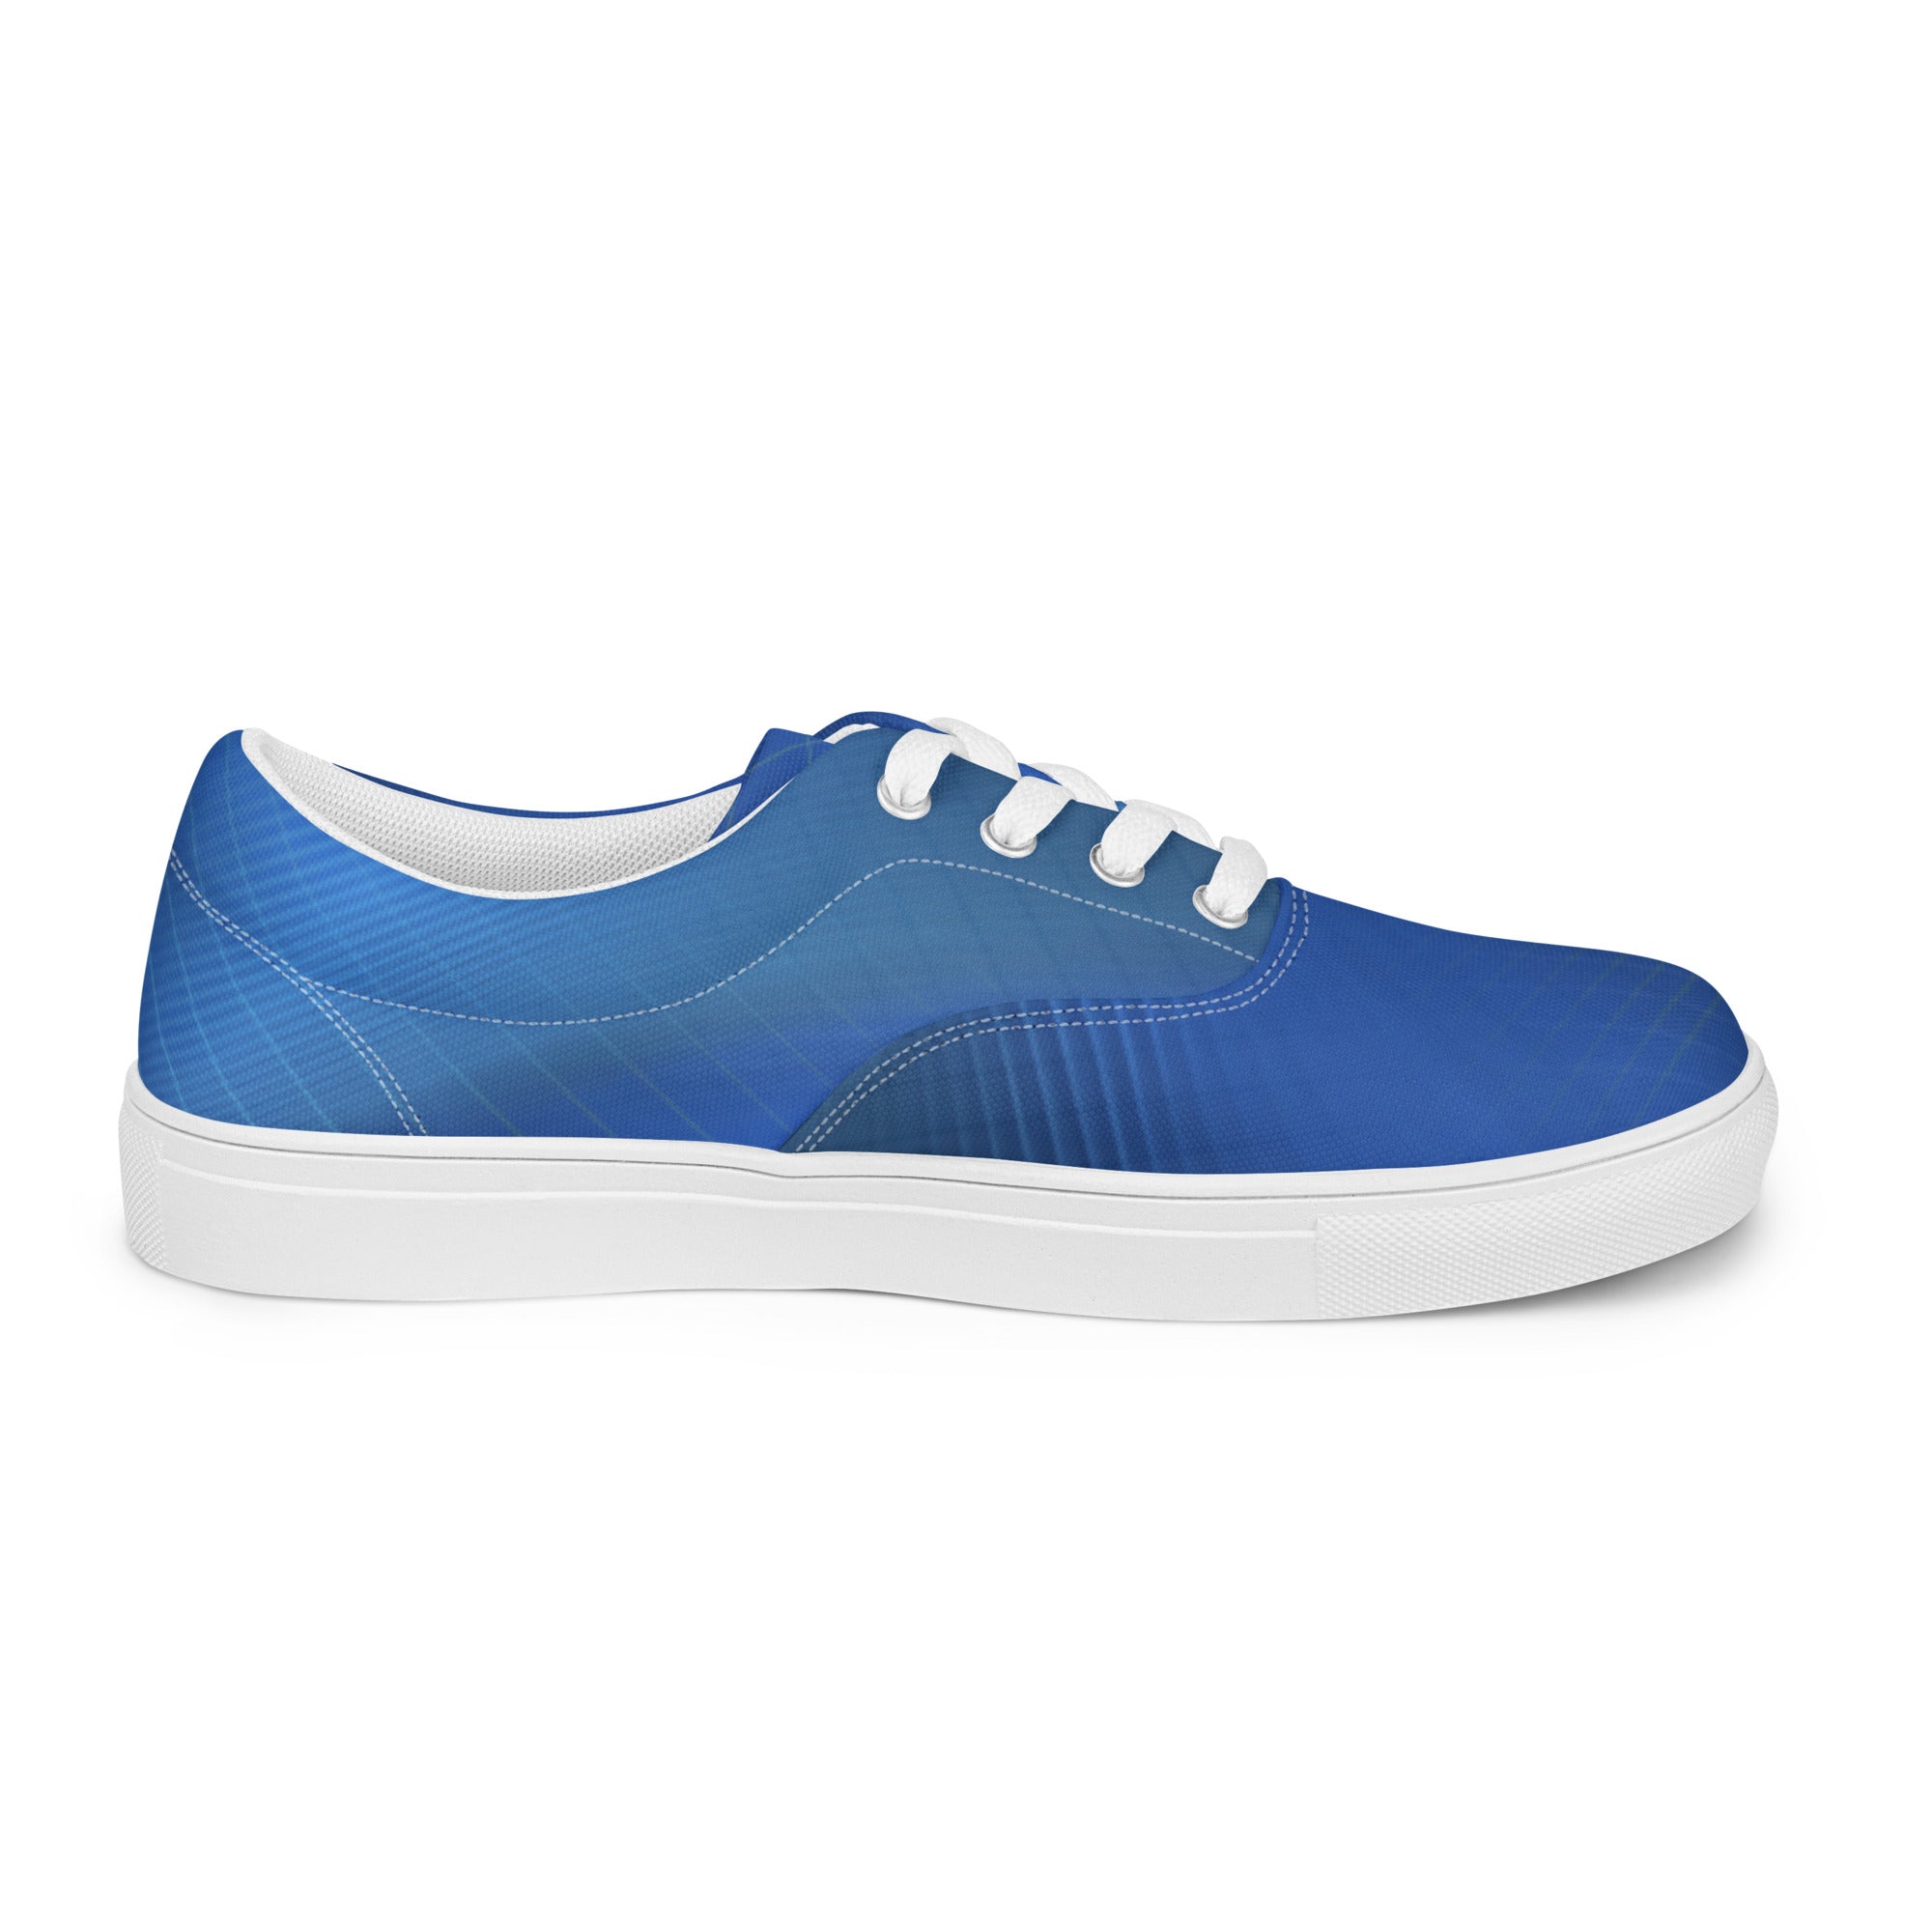 Stride in Style: Unleash Your Uniqueness with Our Men's Blue Lace-Up Canvas Shoes